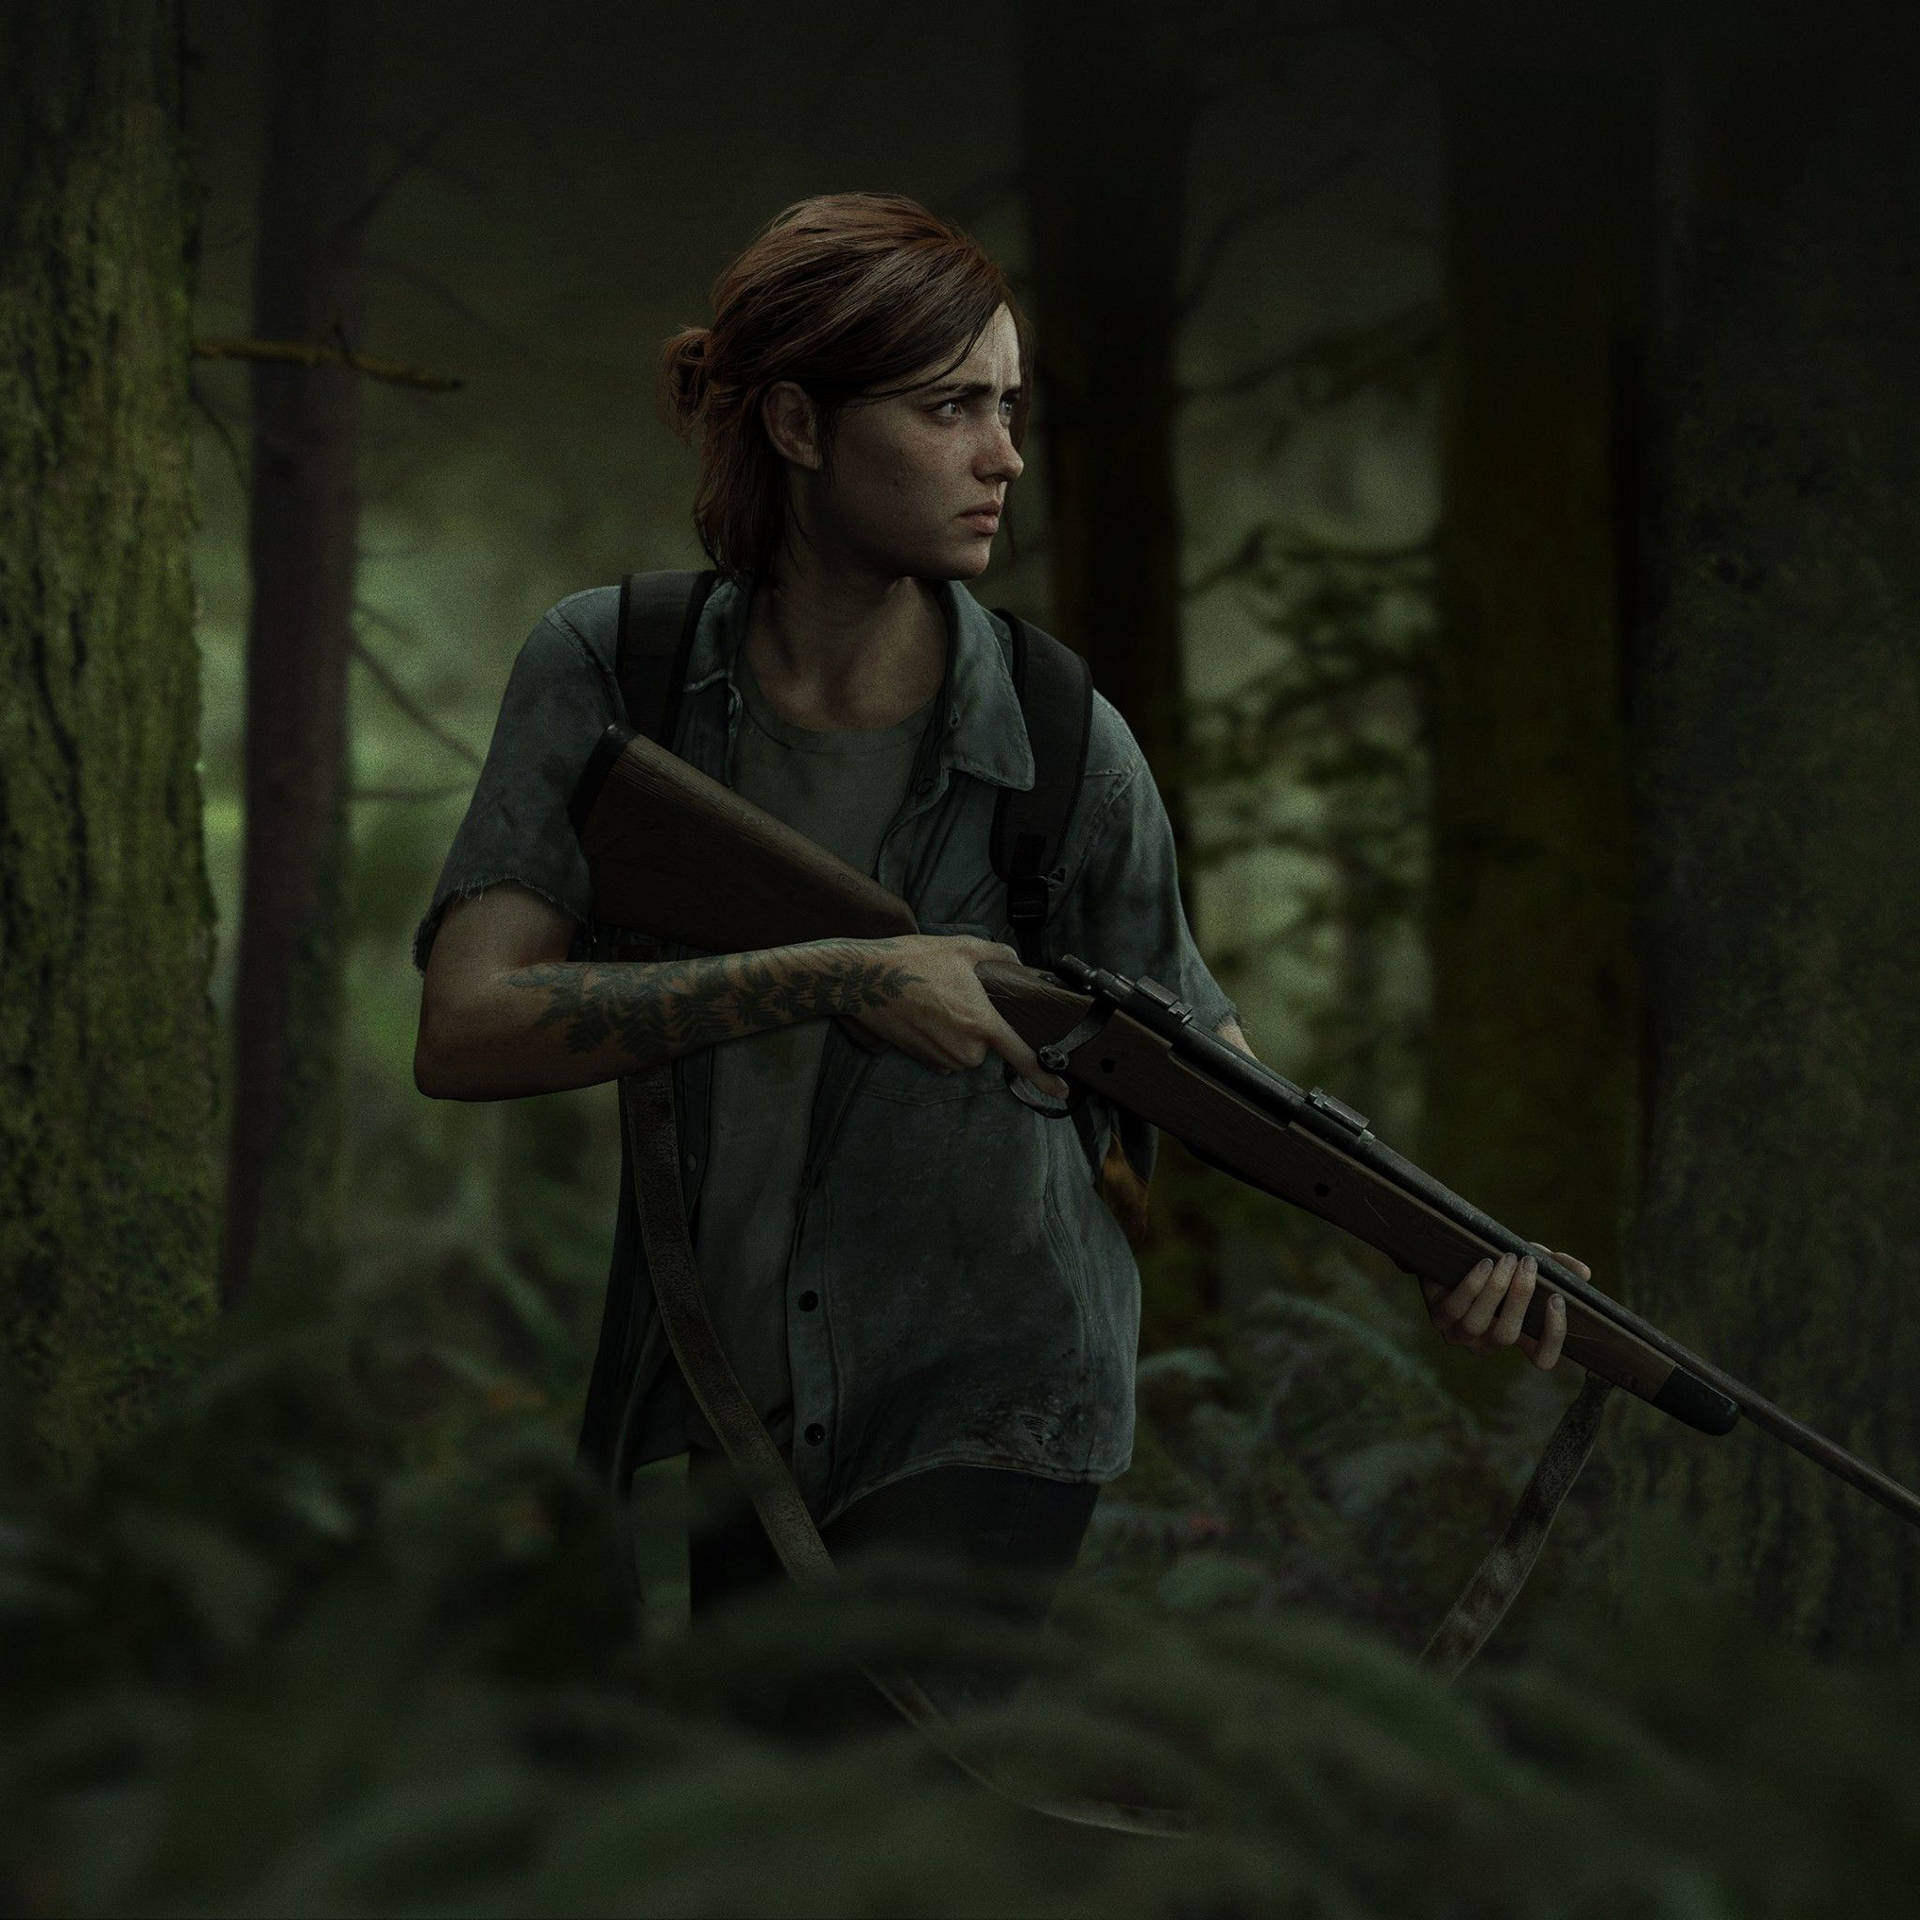 Ellie Hunts To Survive In The Apocalyptic World Of The Last Of Us Background